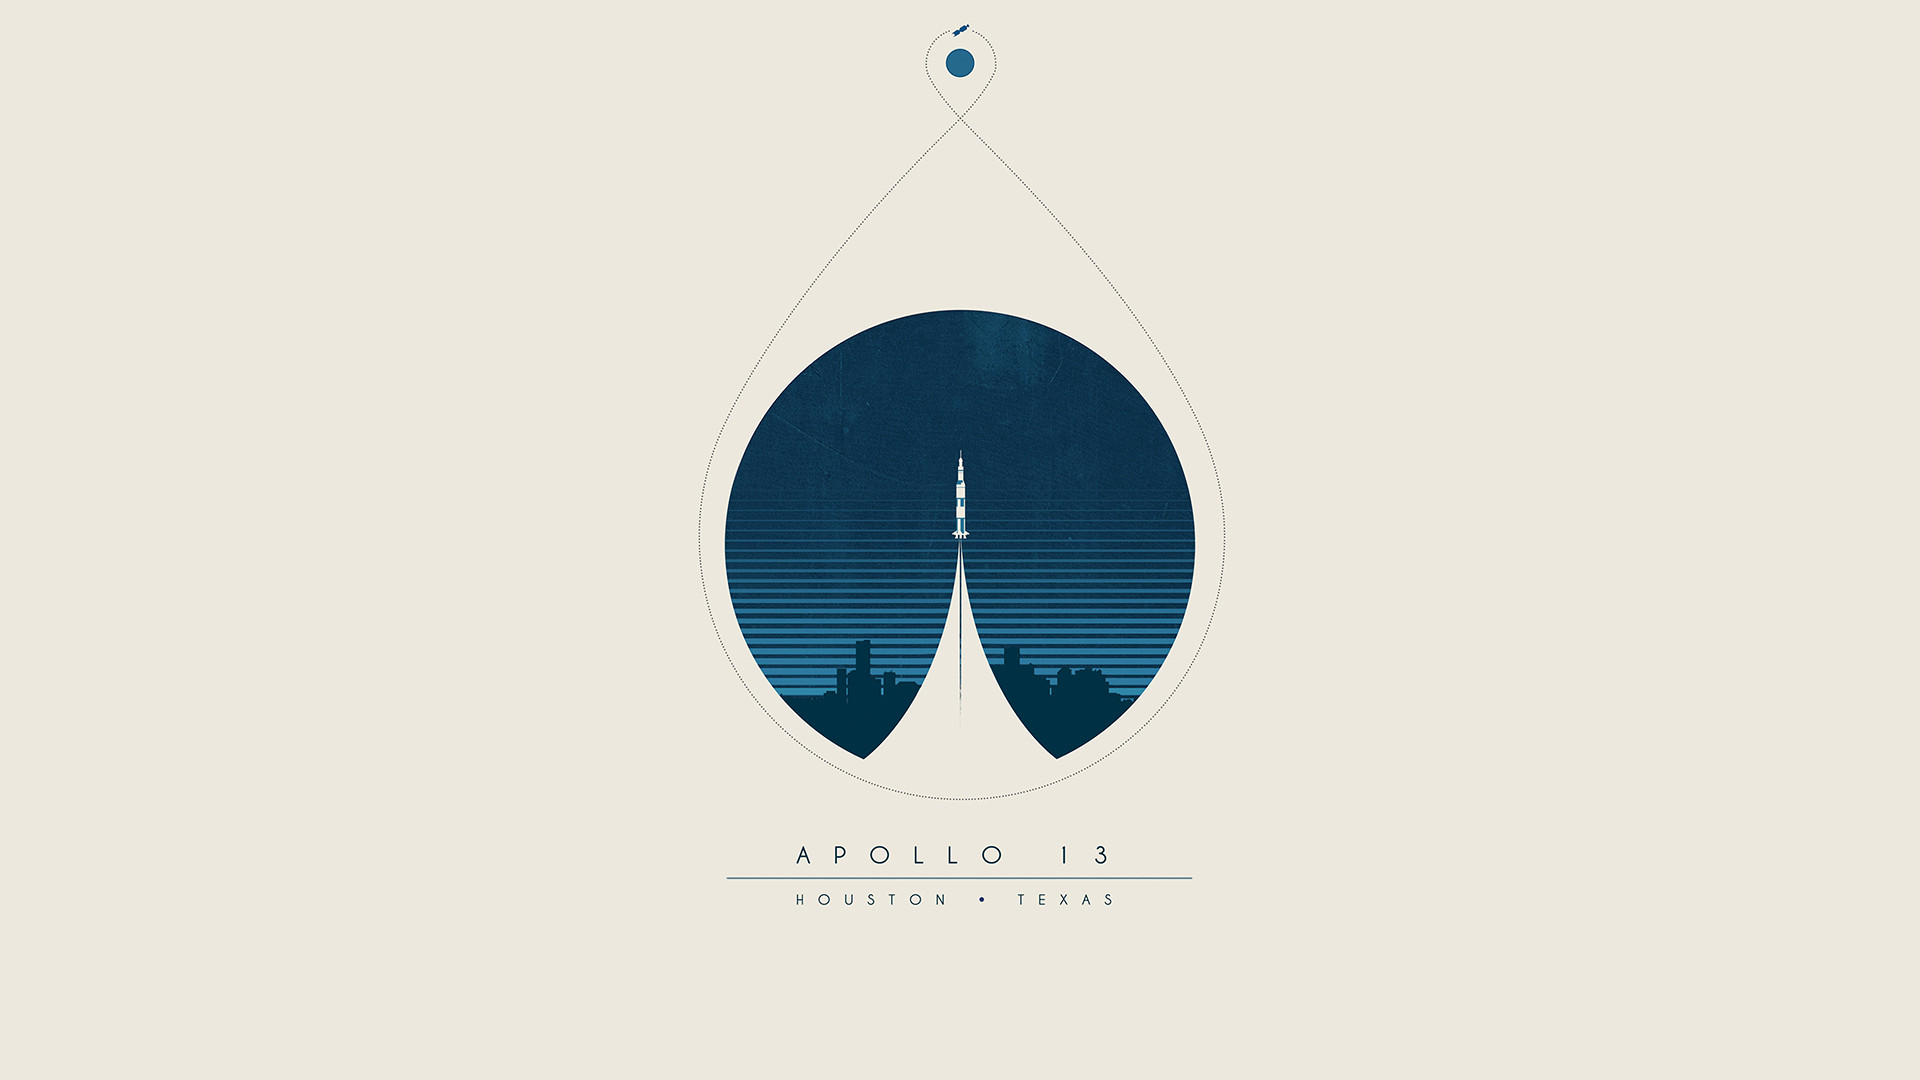 1920x1080 NASA's "Apollo 13" Poster as a Wallpaper [, 4k in comments] ...